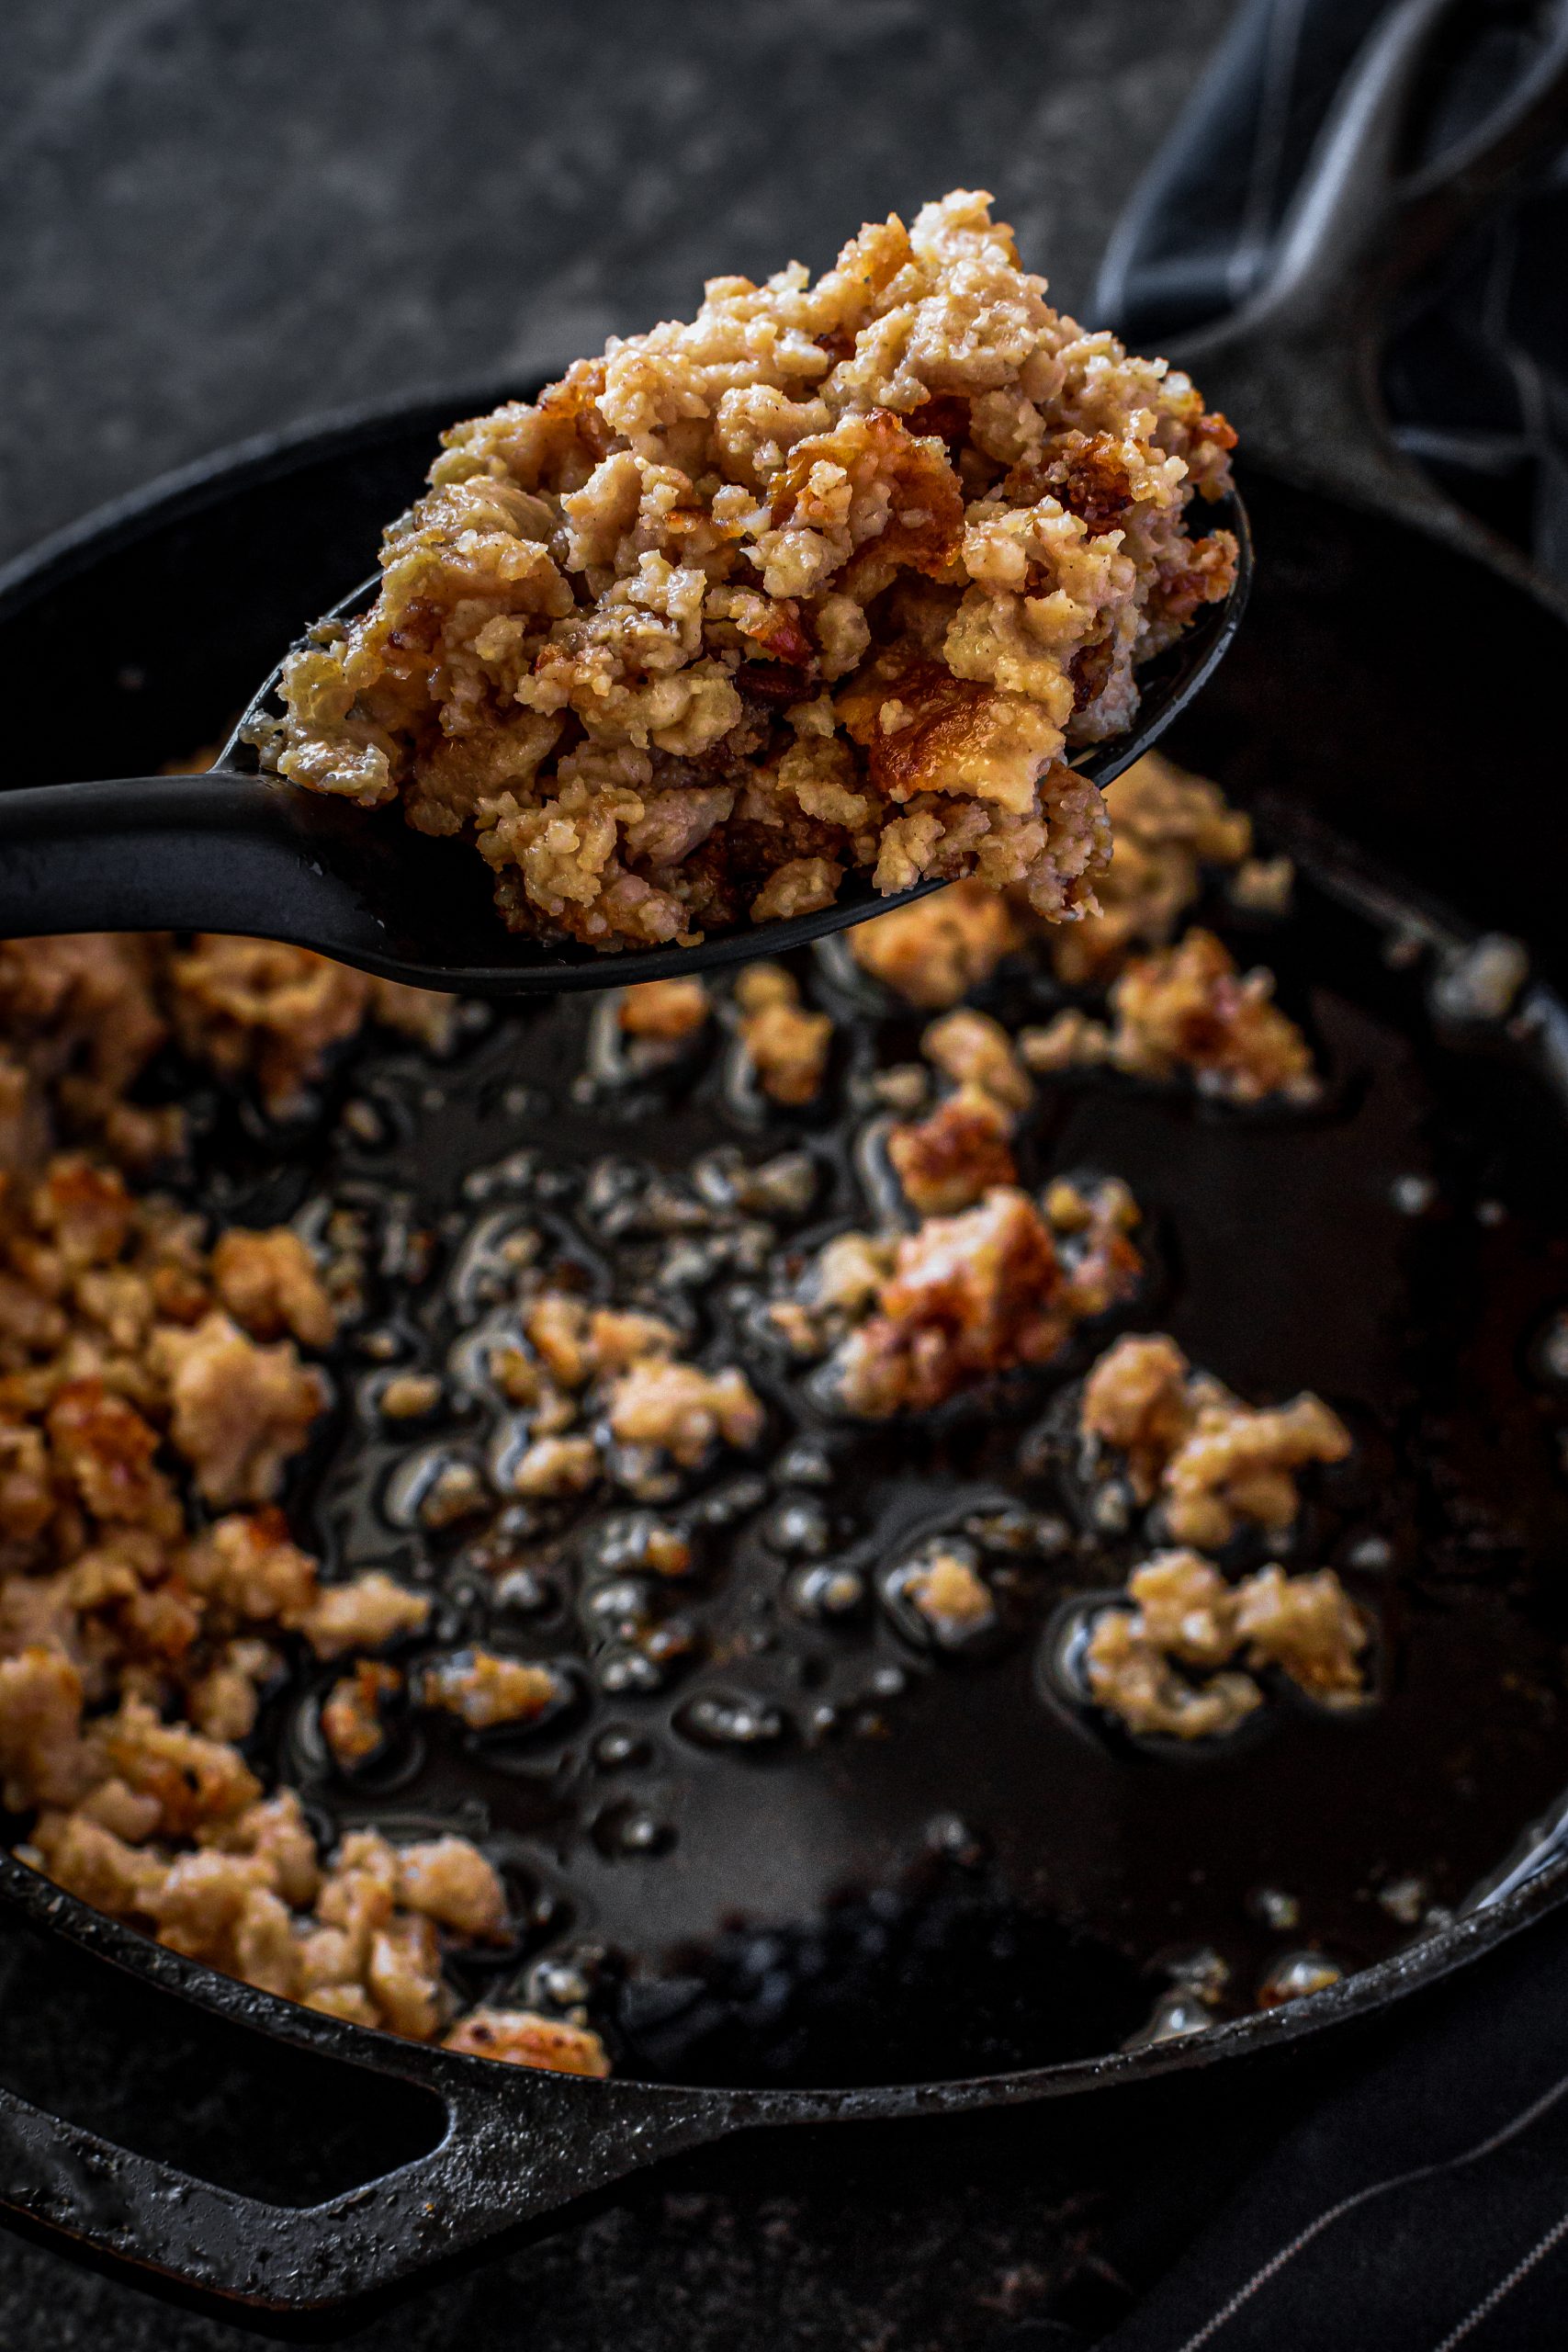 Add the sausage to a skillet over medium-high heat, and cook until crumbled and fully browned. Drain the excess grease. 